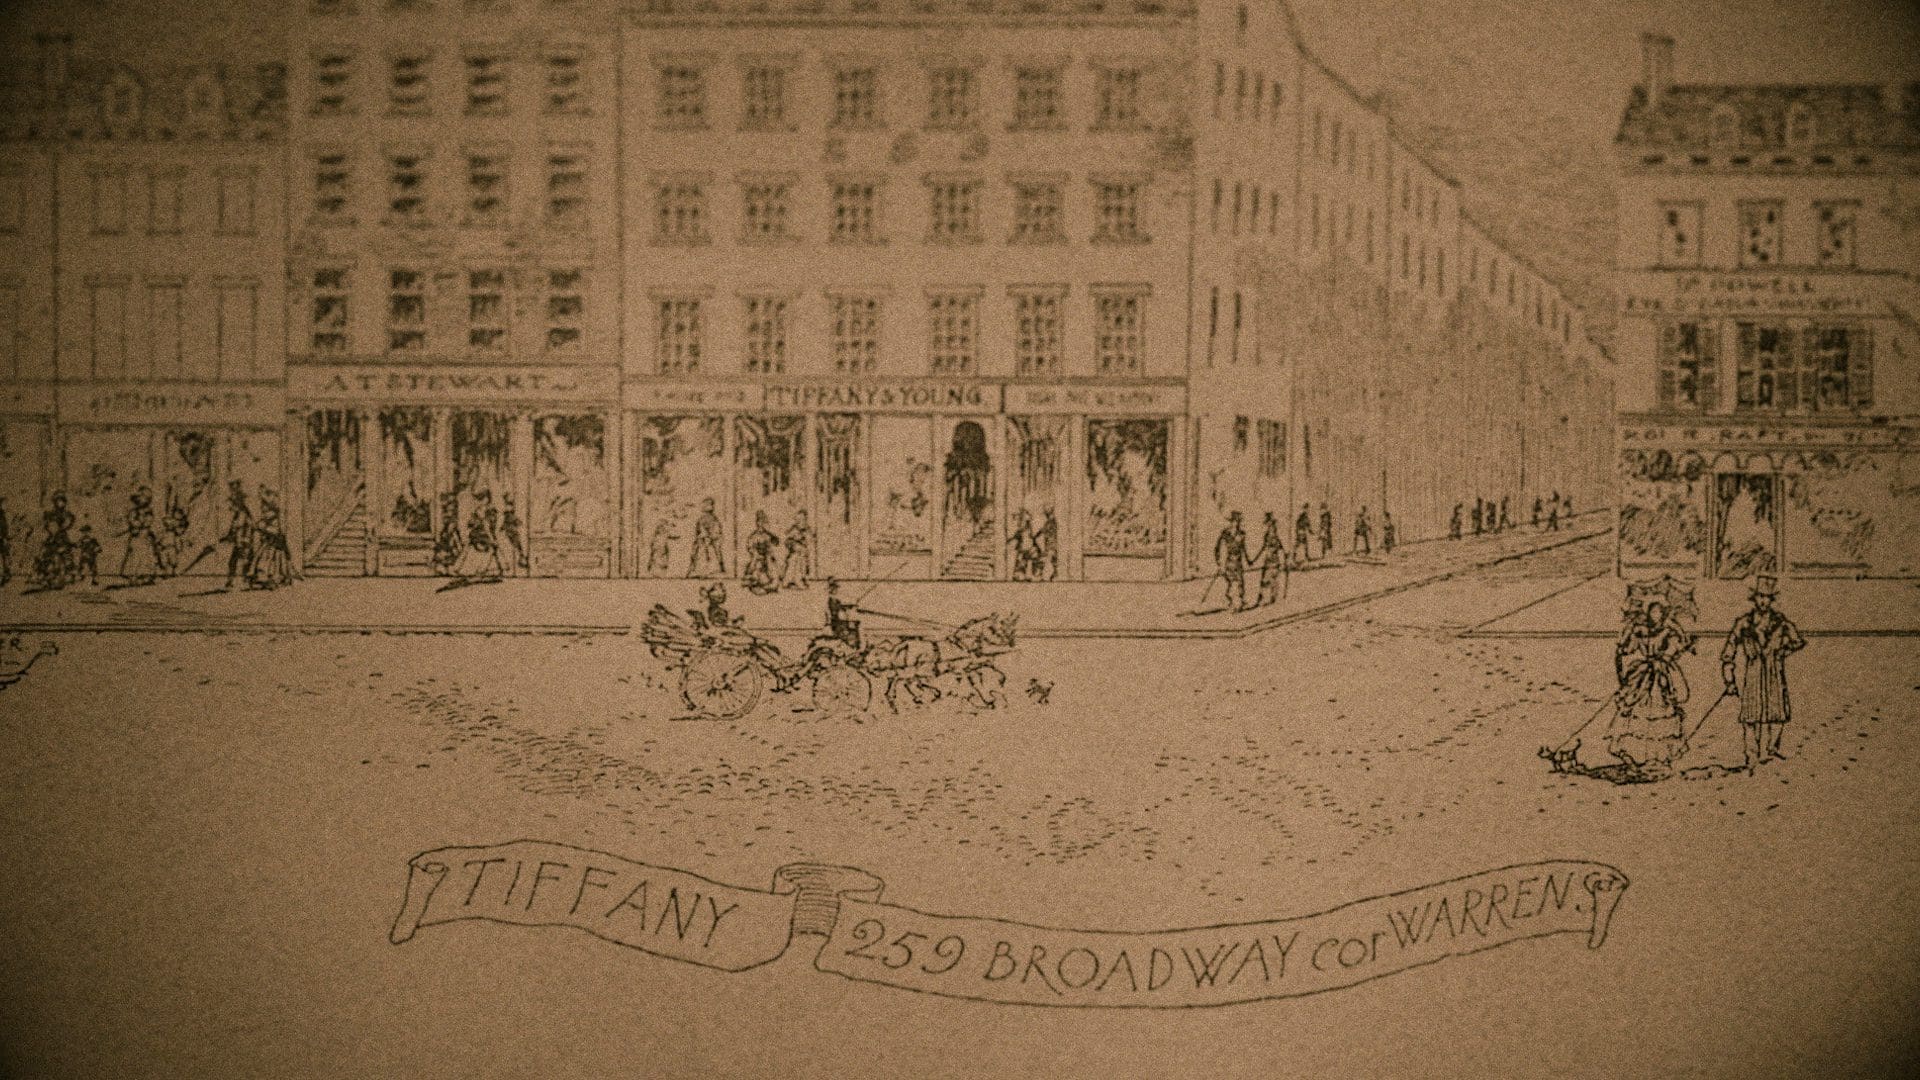 Vintage illustration of the original Tiffany & Co. storefront at 259 Broadway, corner of Warren, bustling with activity and horse-drawn carriages from the 19th century.